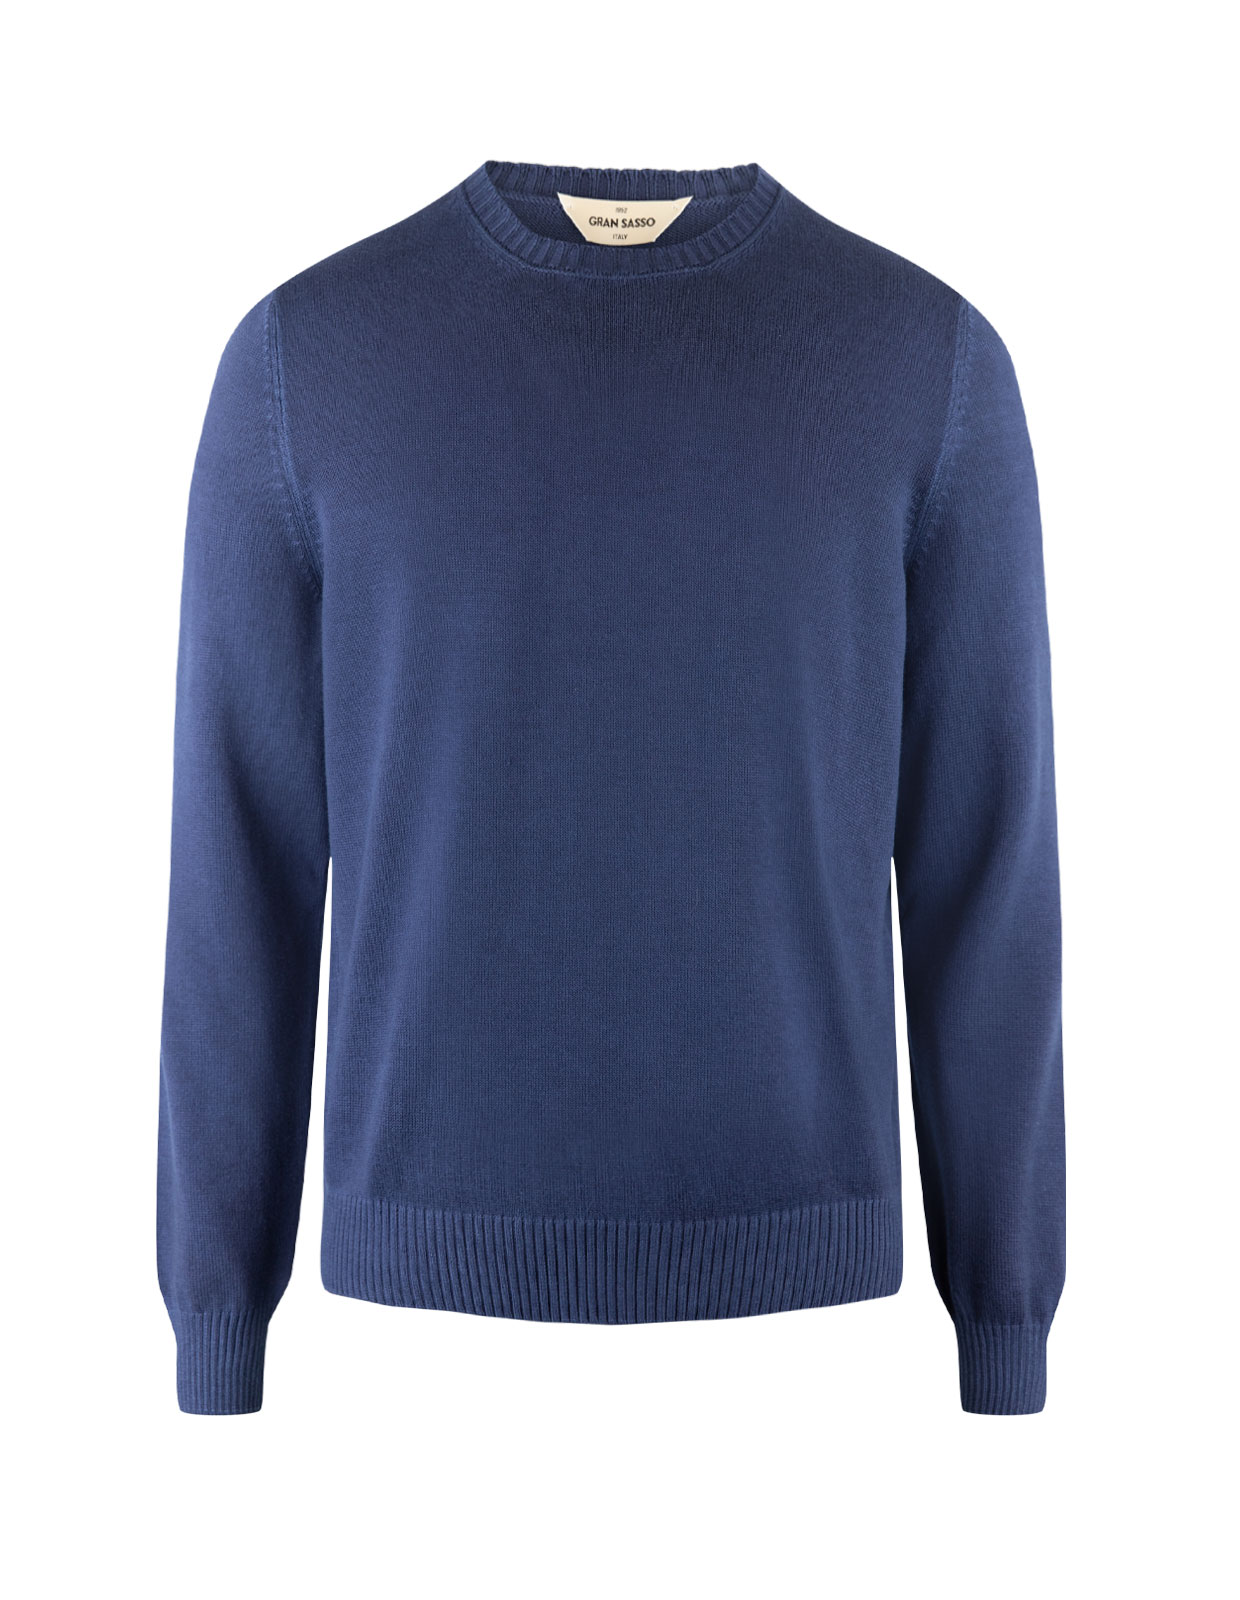 Crew Neck Sweater Knitted Cotton Navy